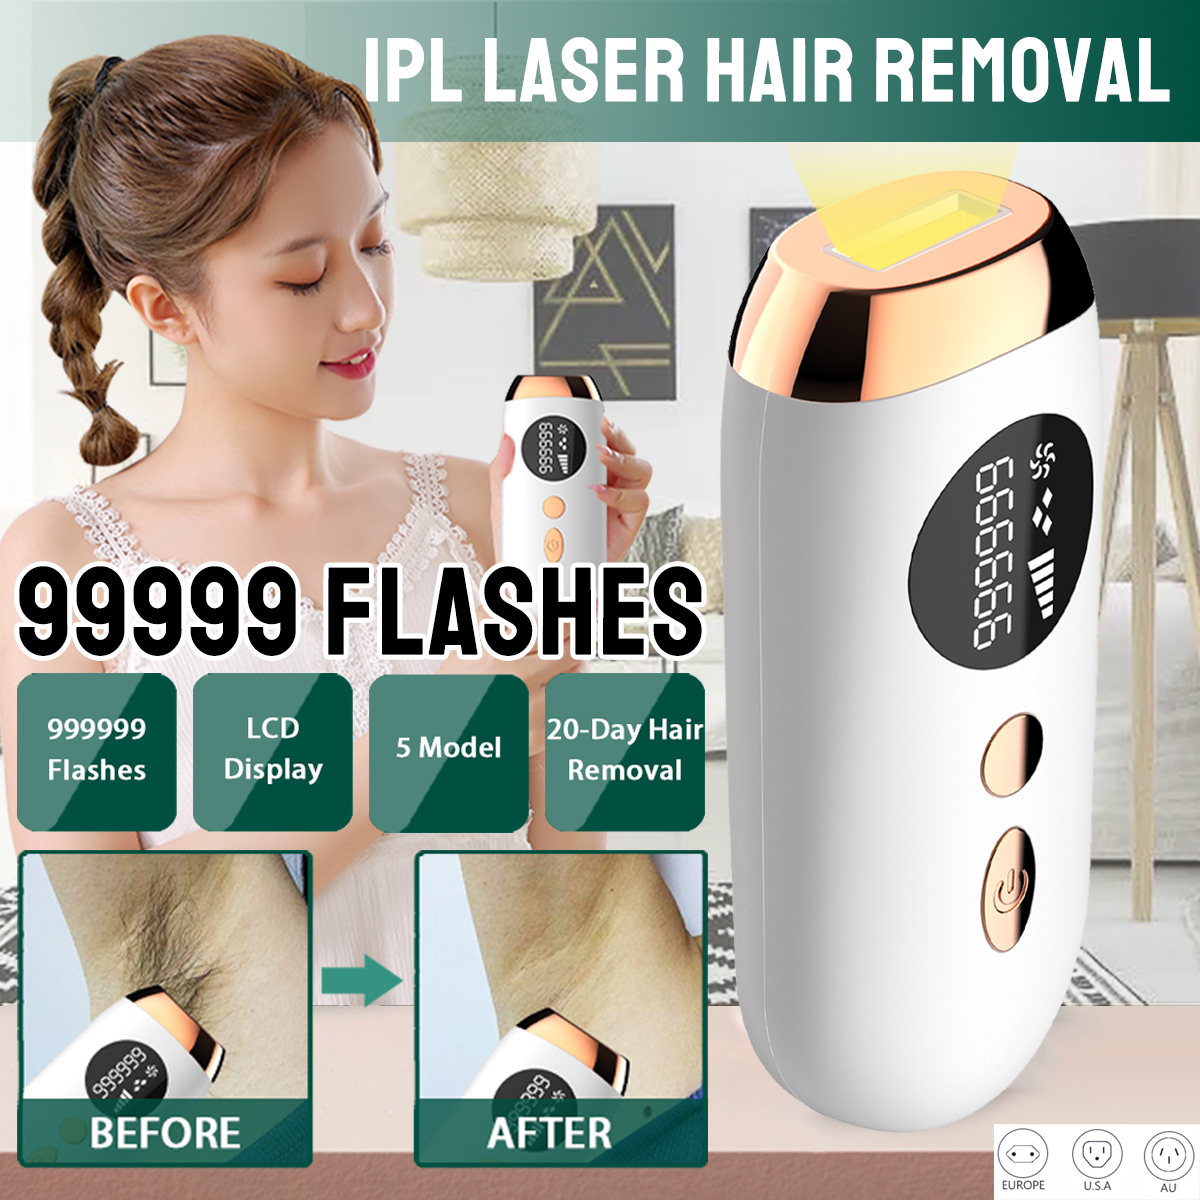 BANGGOOD offers 29€ with Coupon for 999,999 Flashes IPL Hair Removal Machine Laser Painless Whole